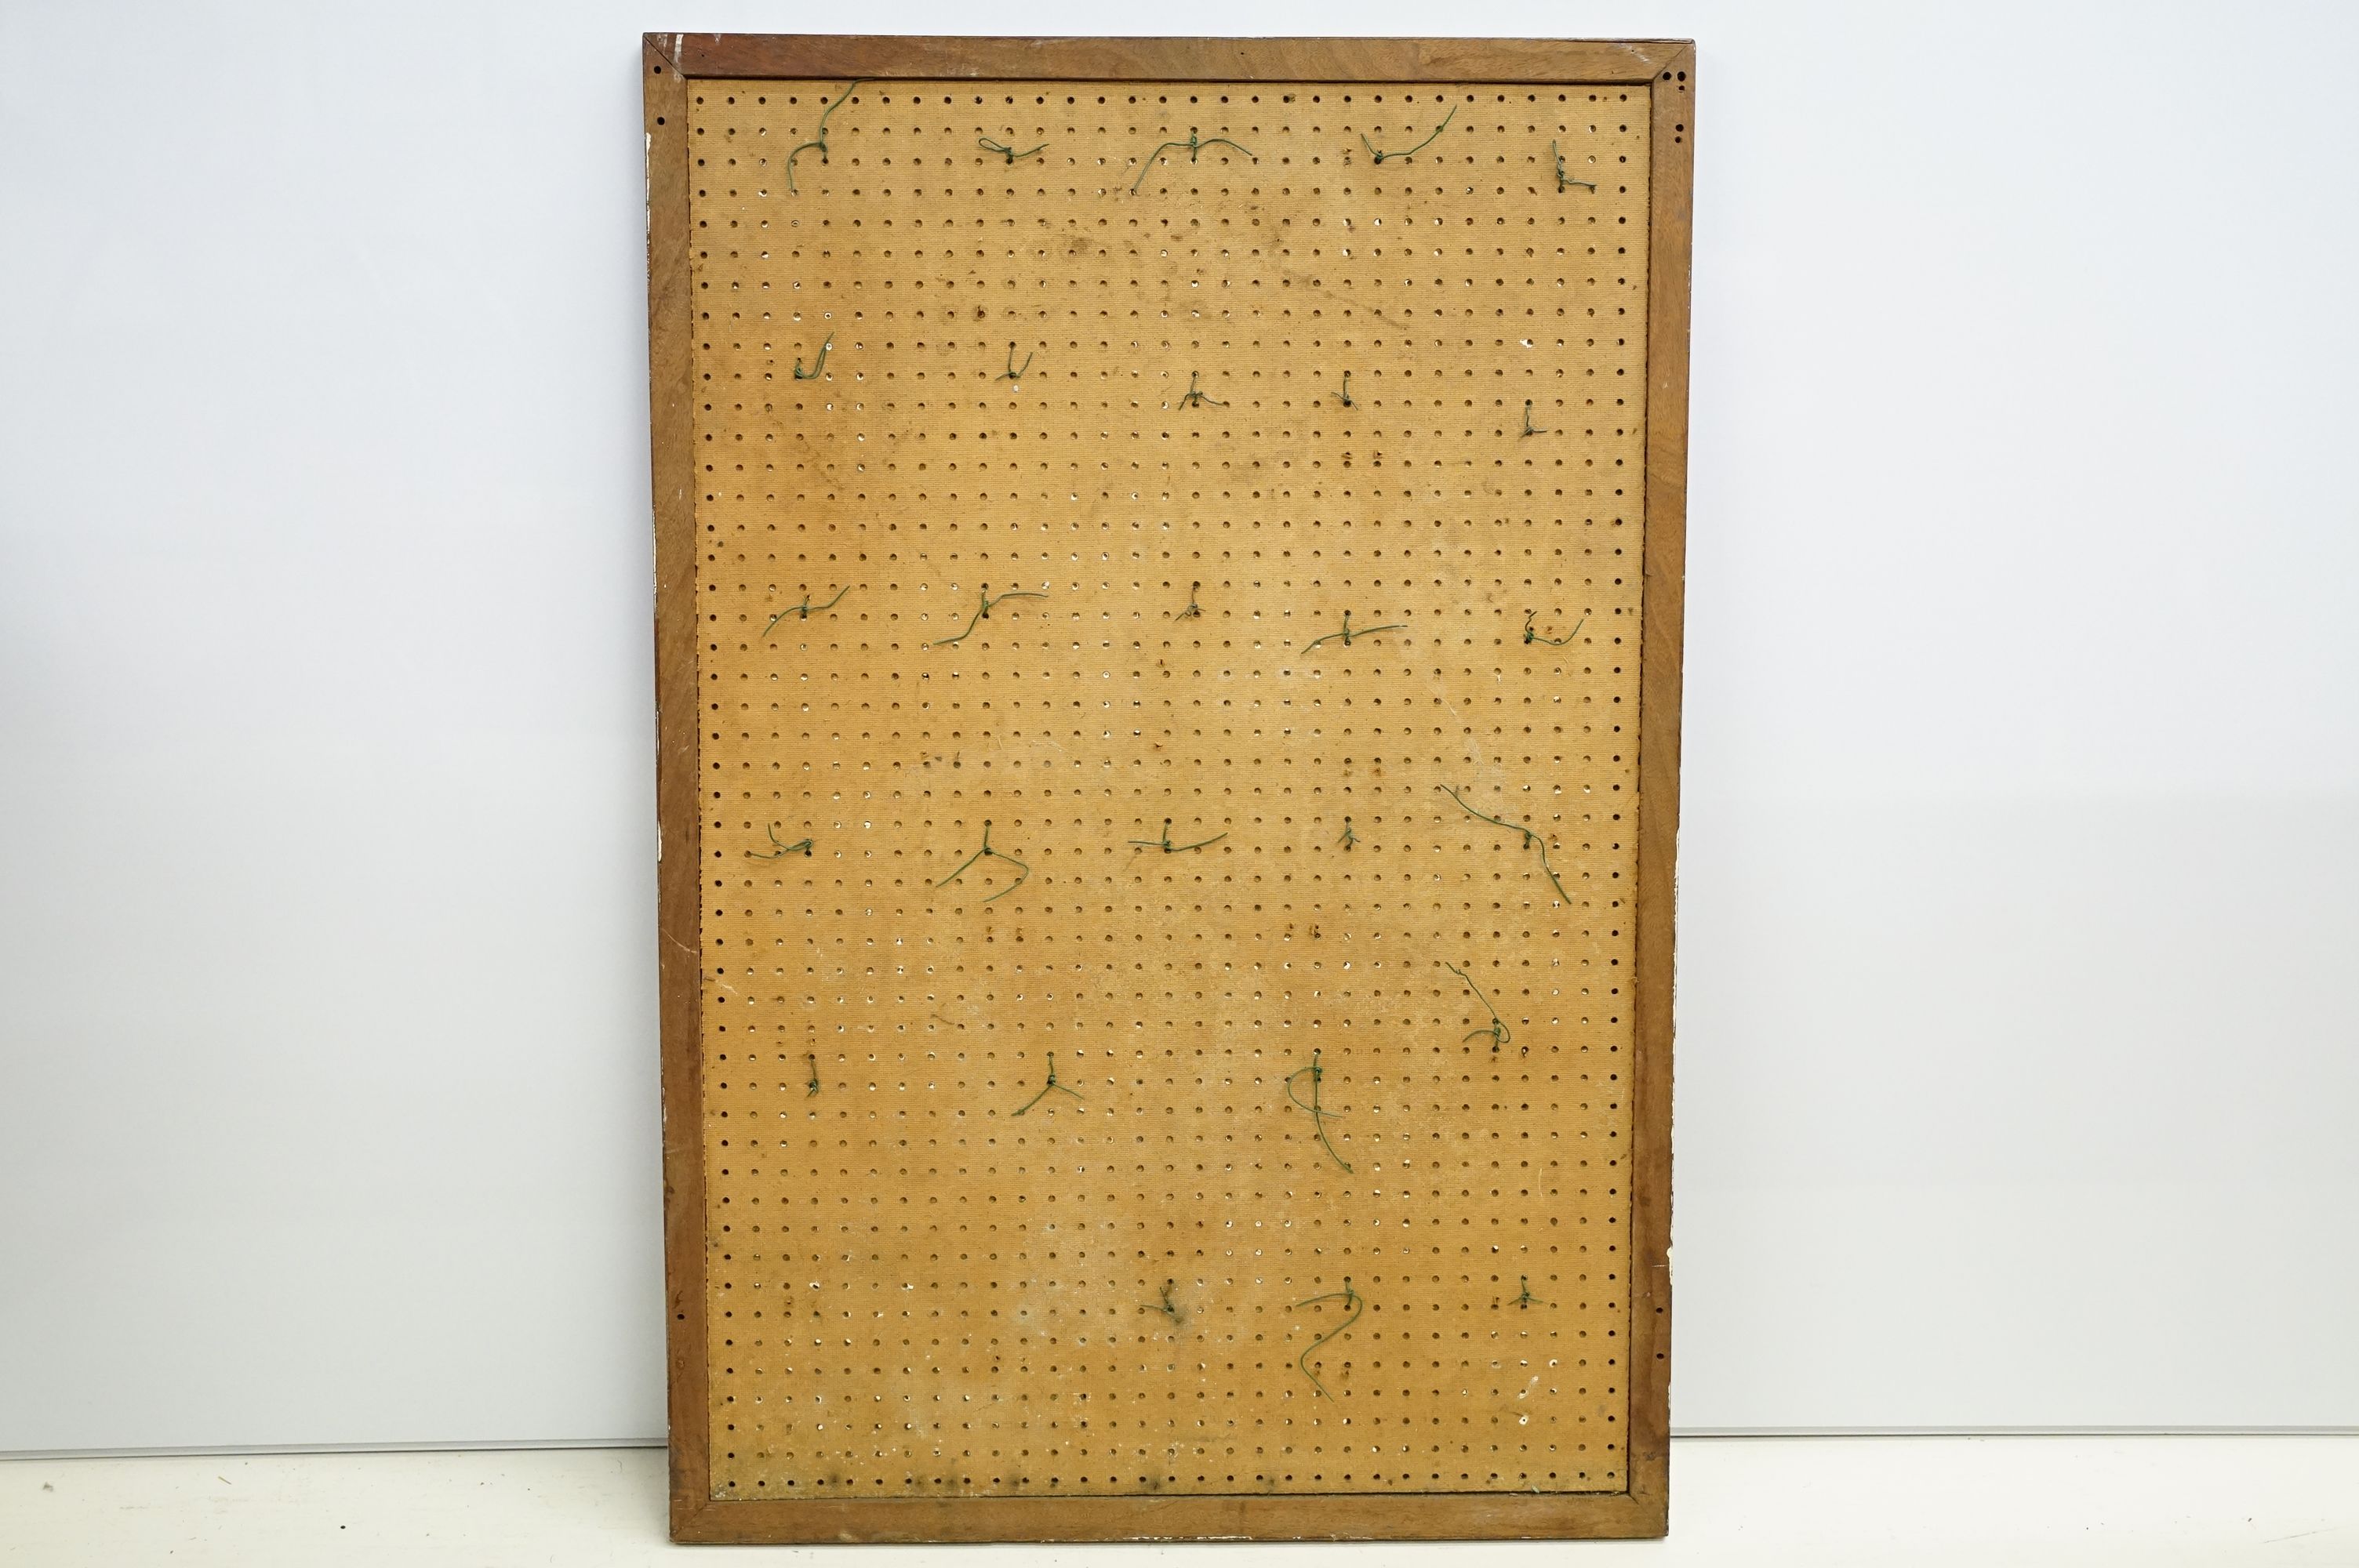 Collection of antique horse brasses mounted to canvas covered board and framed. Measures 97 x 66cm. - Image 11 of 11